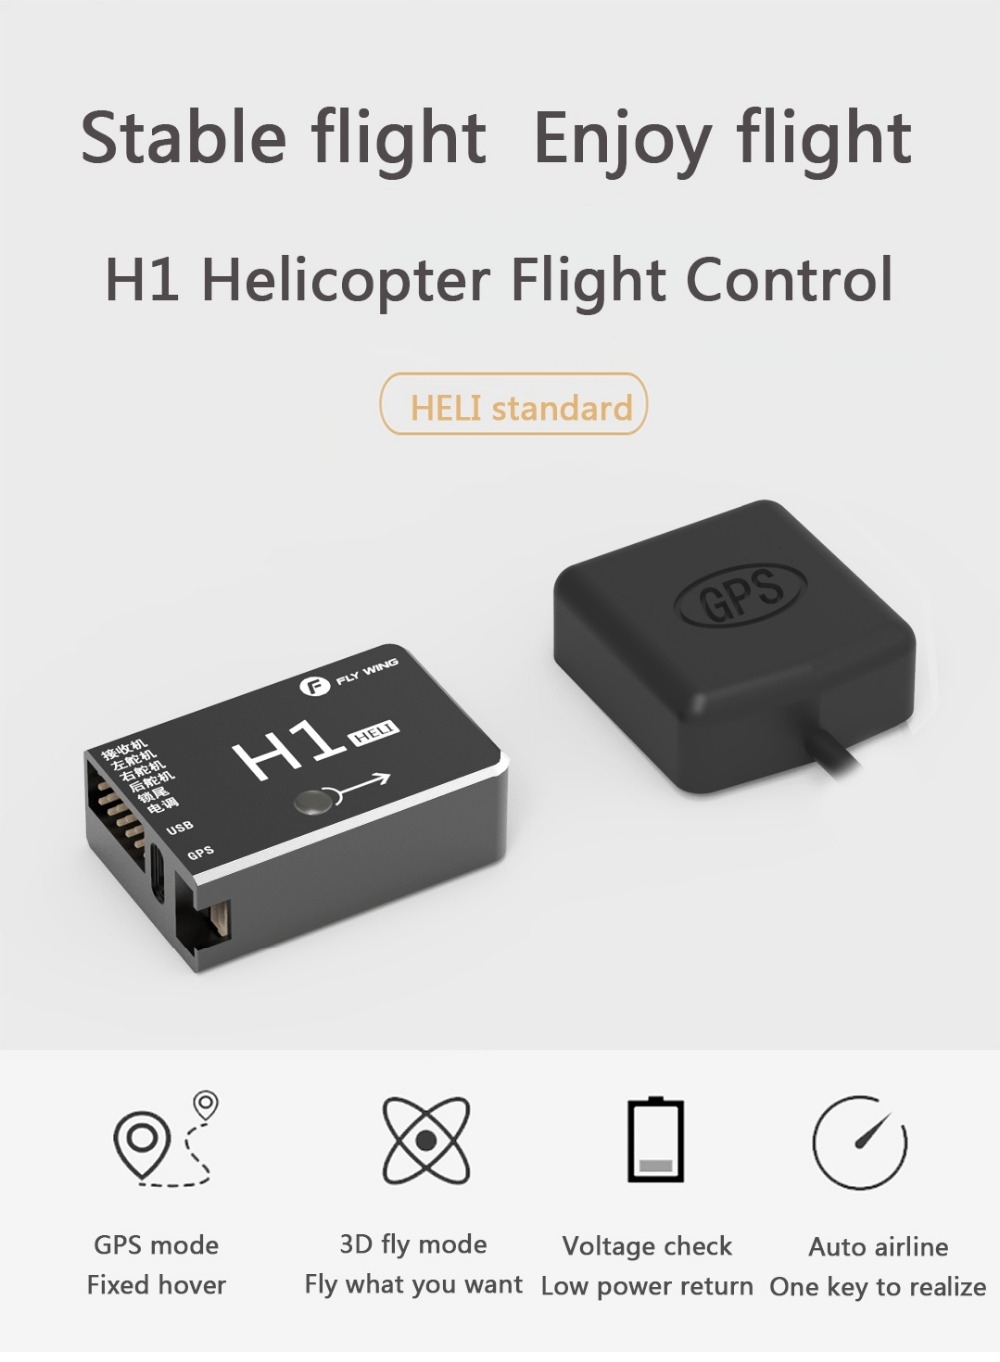 15% OFF for FLY WING H1 Helicopter Flight Controller with GPS Voltage Test One-key Return 3D Flying Function for ALIGN T-REX SAB GAUI Scale Helicopter